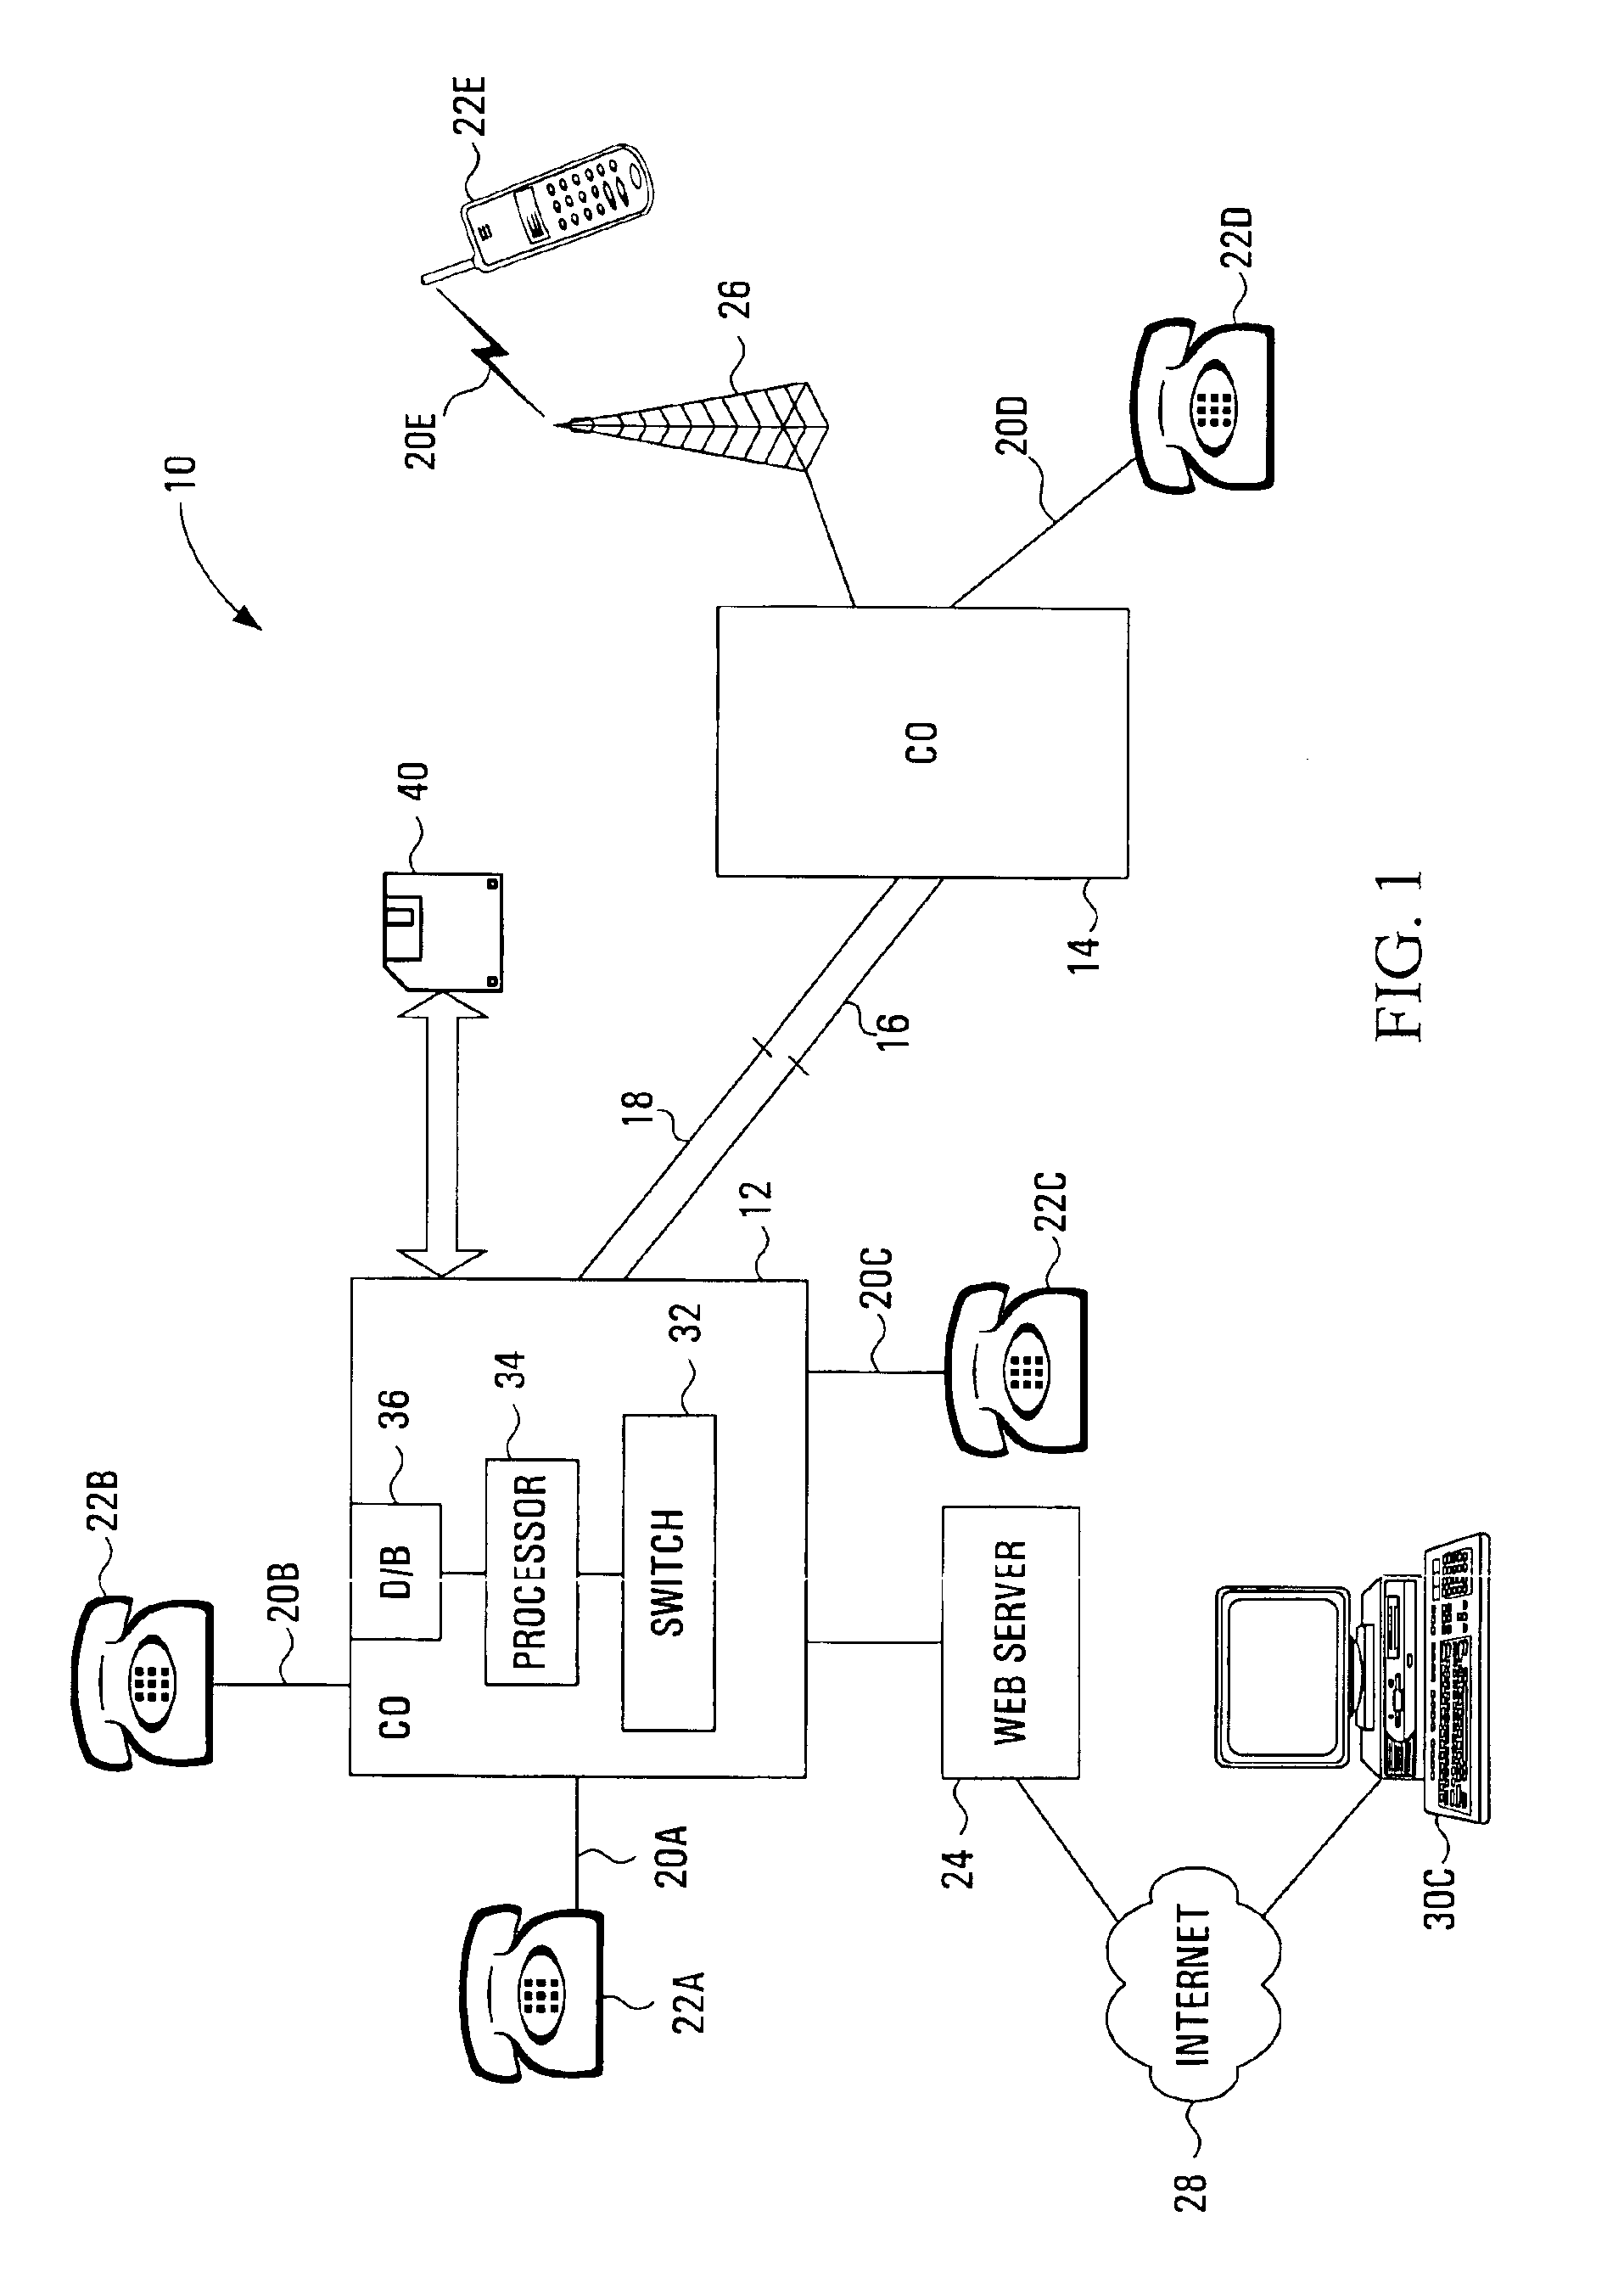 User controlled location sharing during a communication